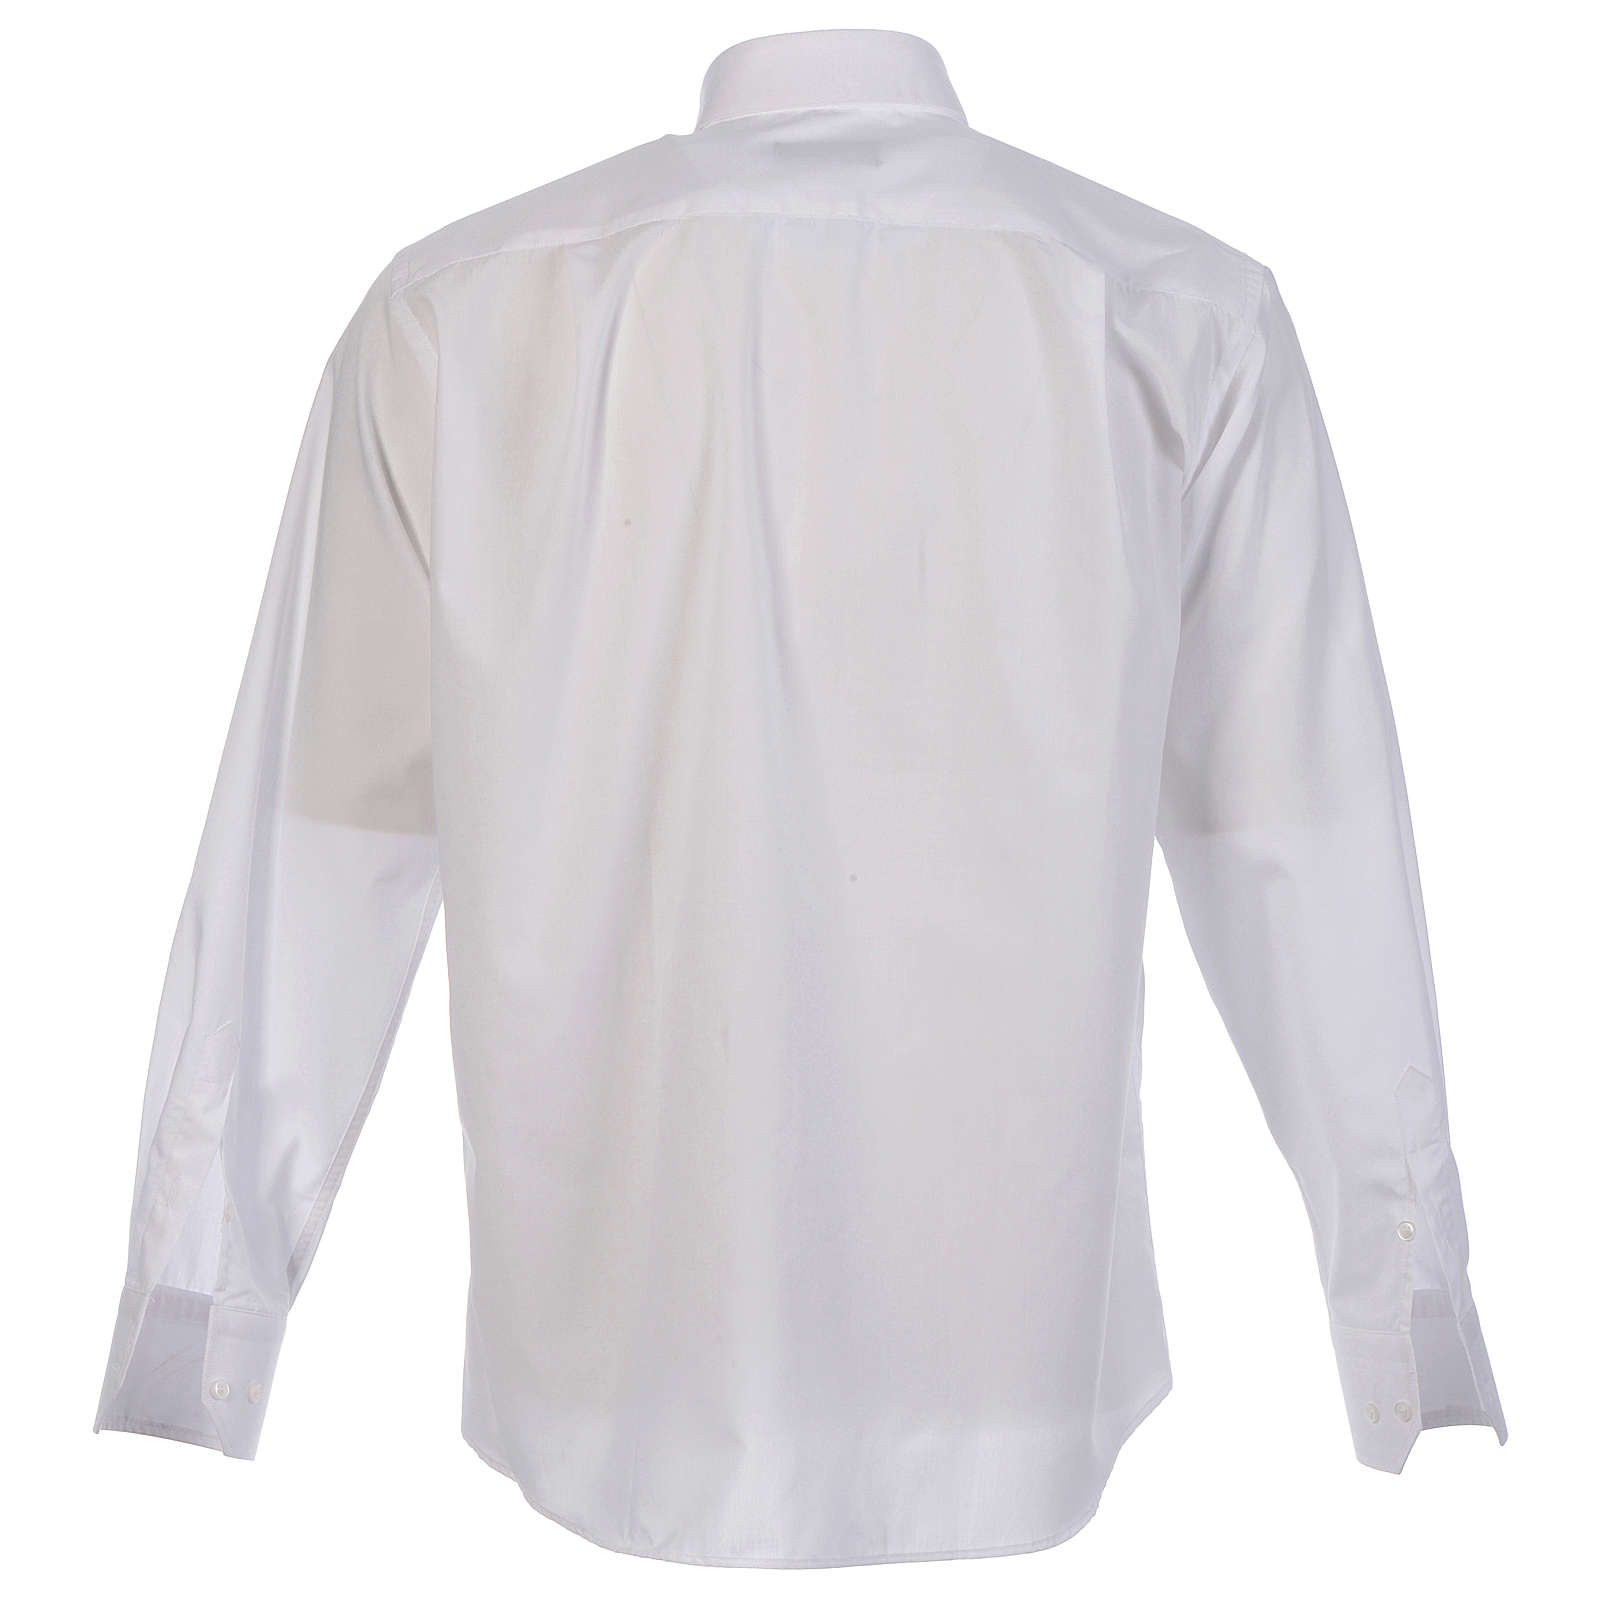 Priest shirt in solid color and diagonal lines white long | online ...